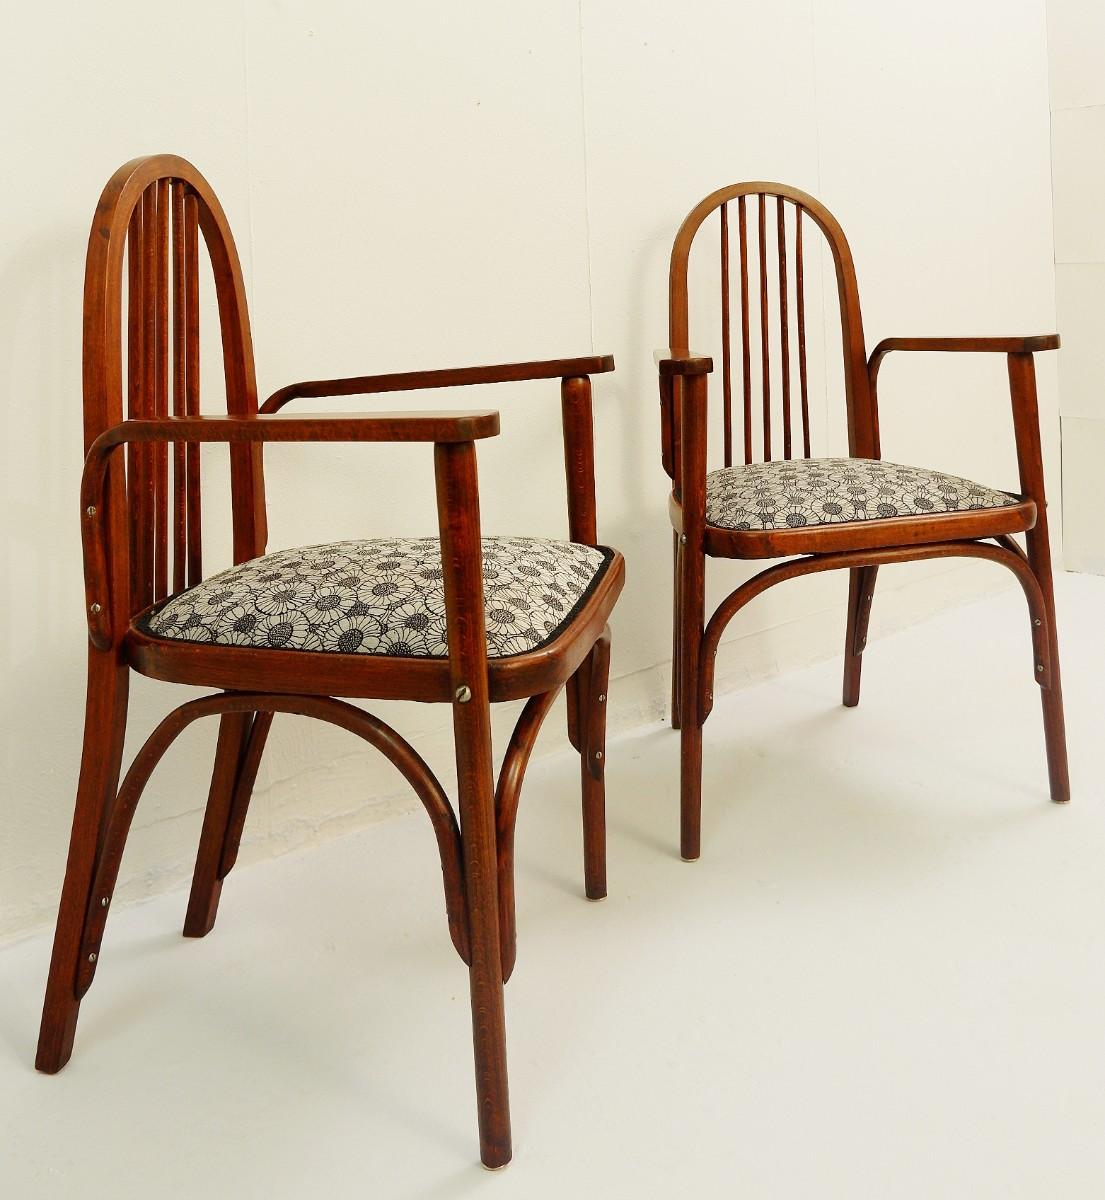 Pair of Josef Hoffmann for Thonet armchairs, new upholstery by Backhausen fabric, circa 1900.